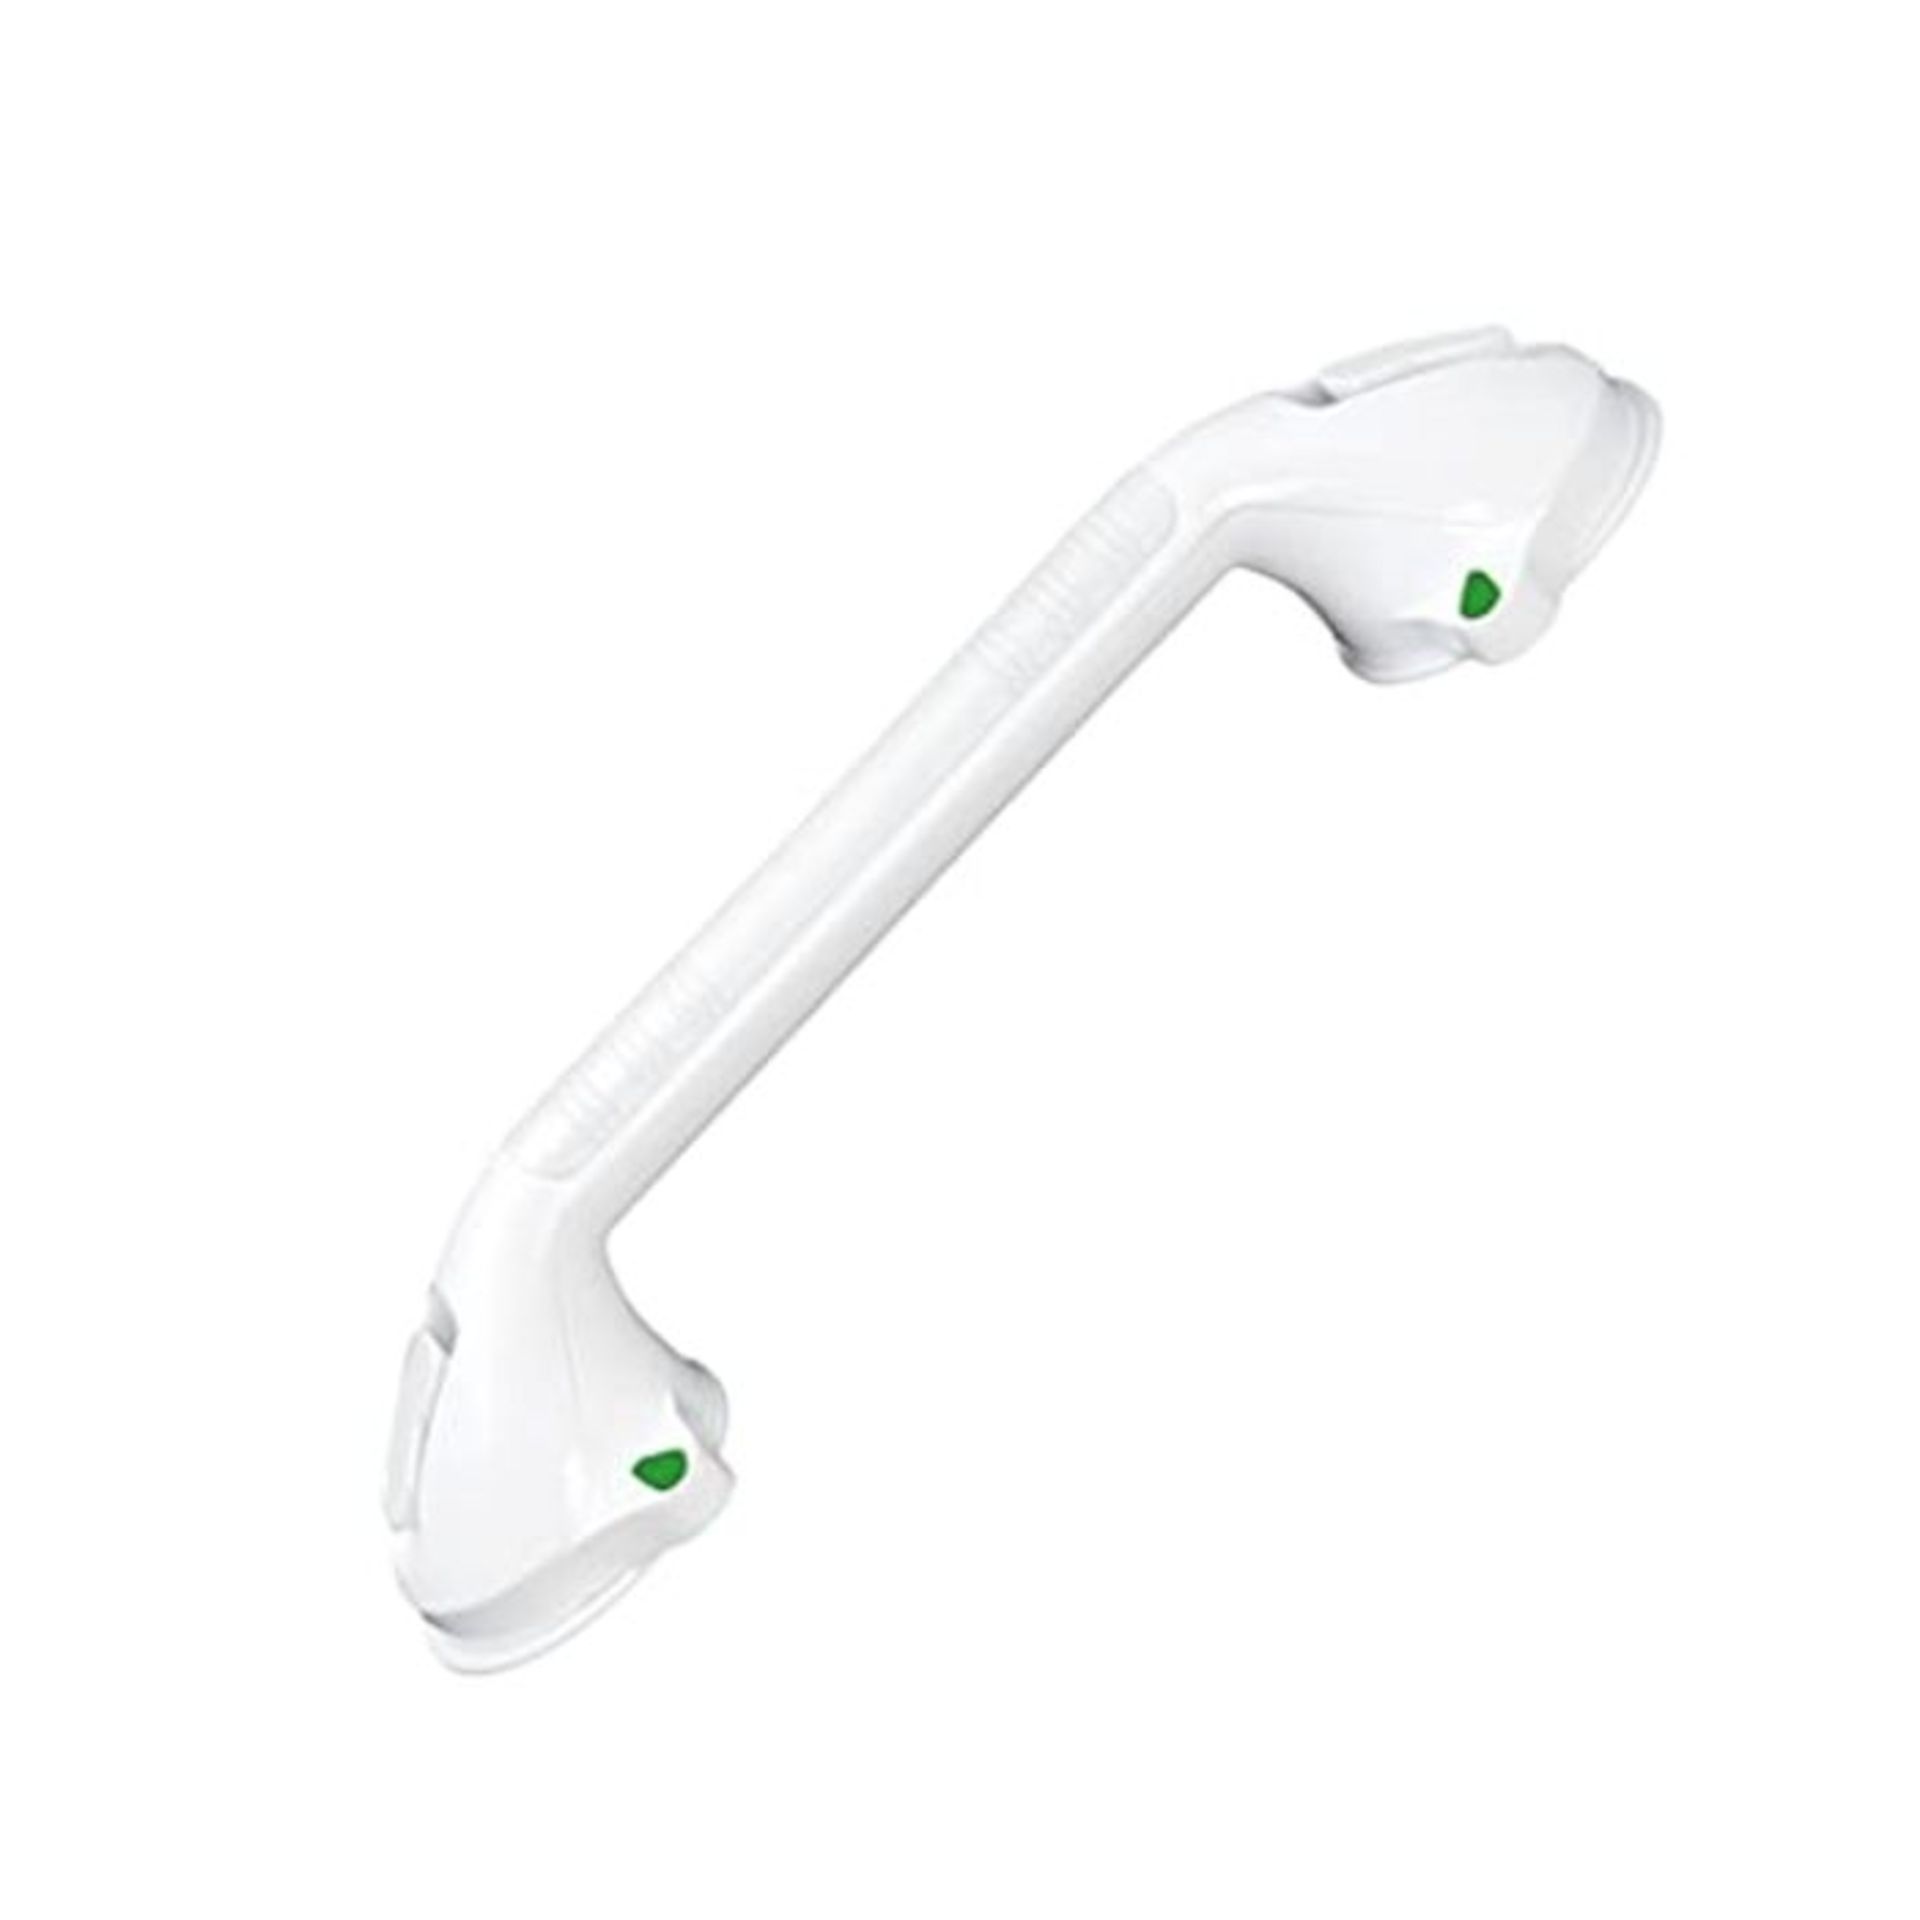 WENKO Wall Grip Secura White 59 cm-with Indicator, 8.5 x 42 x 11.5 cm